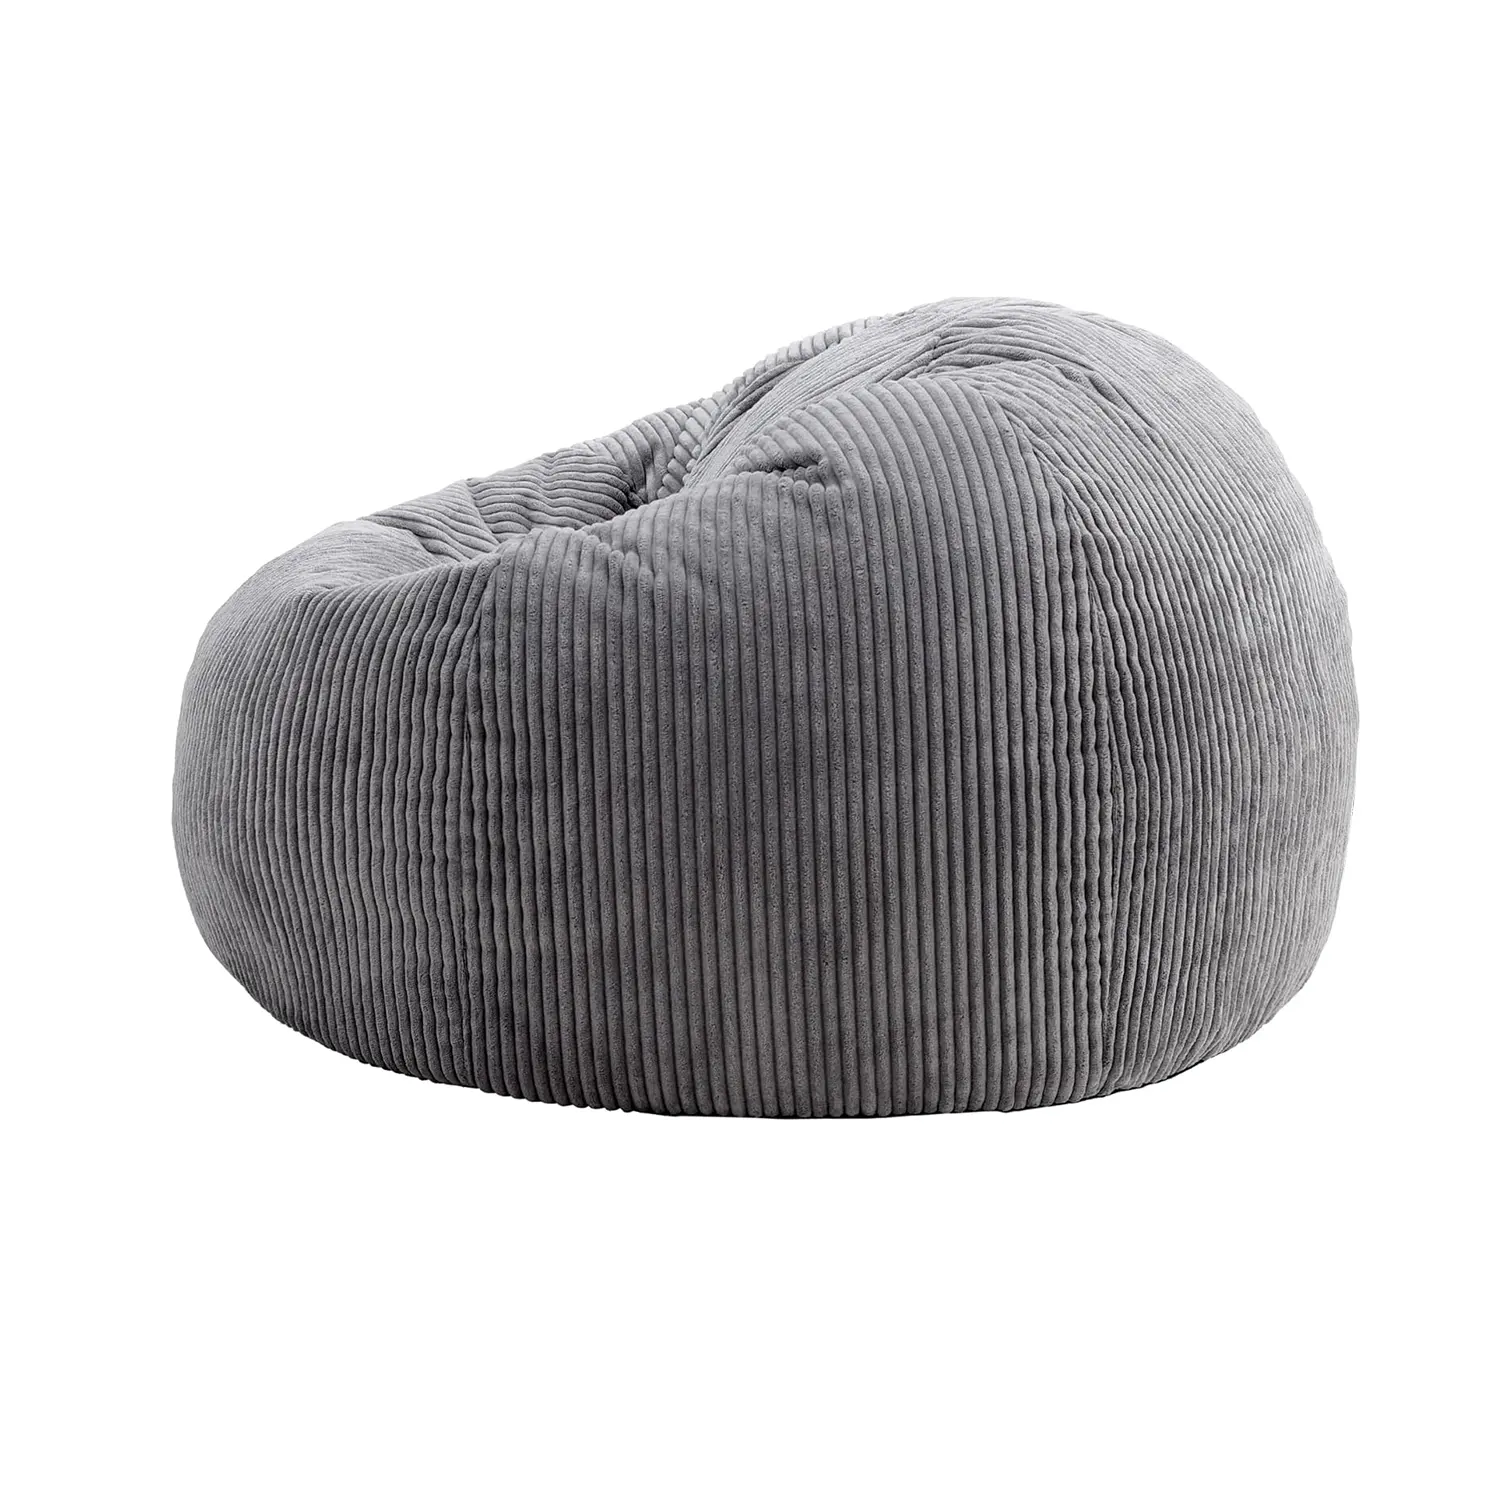 Colorful Custom Lazy Sofa Round Foldable Single Round Big kids grey Bean Bag Sofa Chair with beans filled